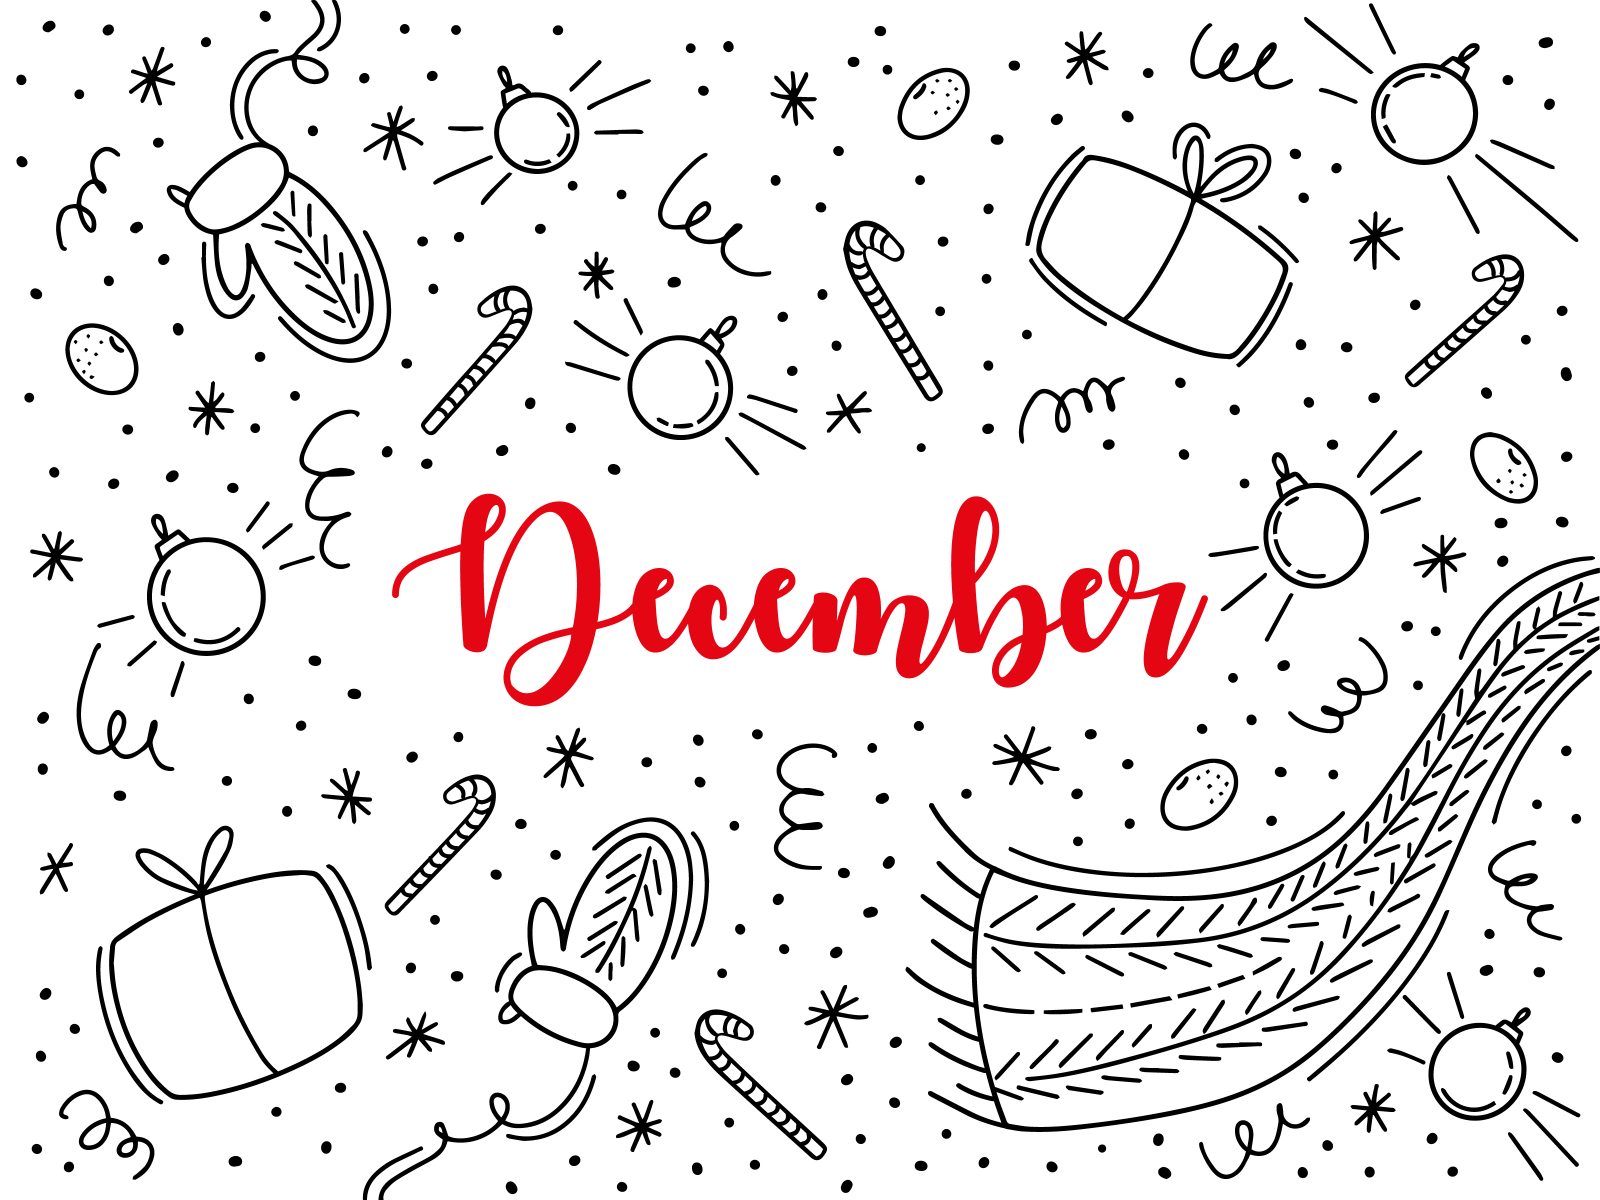 December vector doodle style illustration by Business Corn Valentina